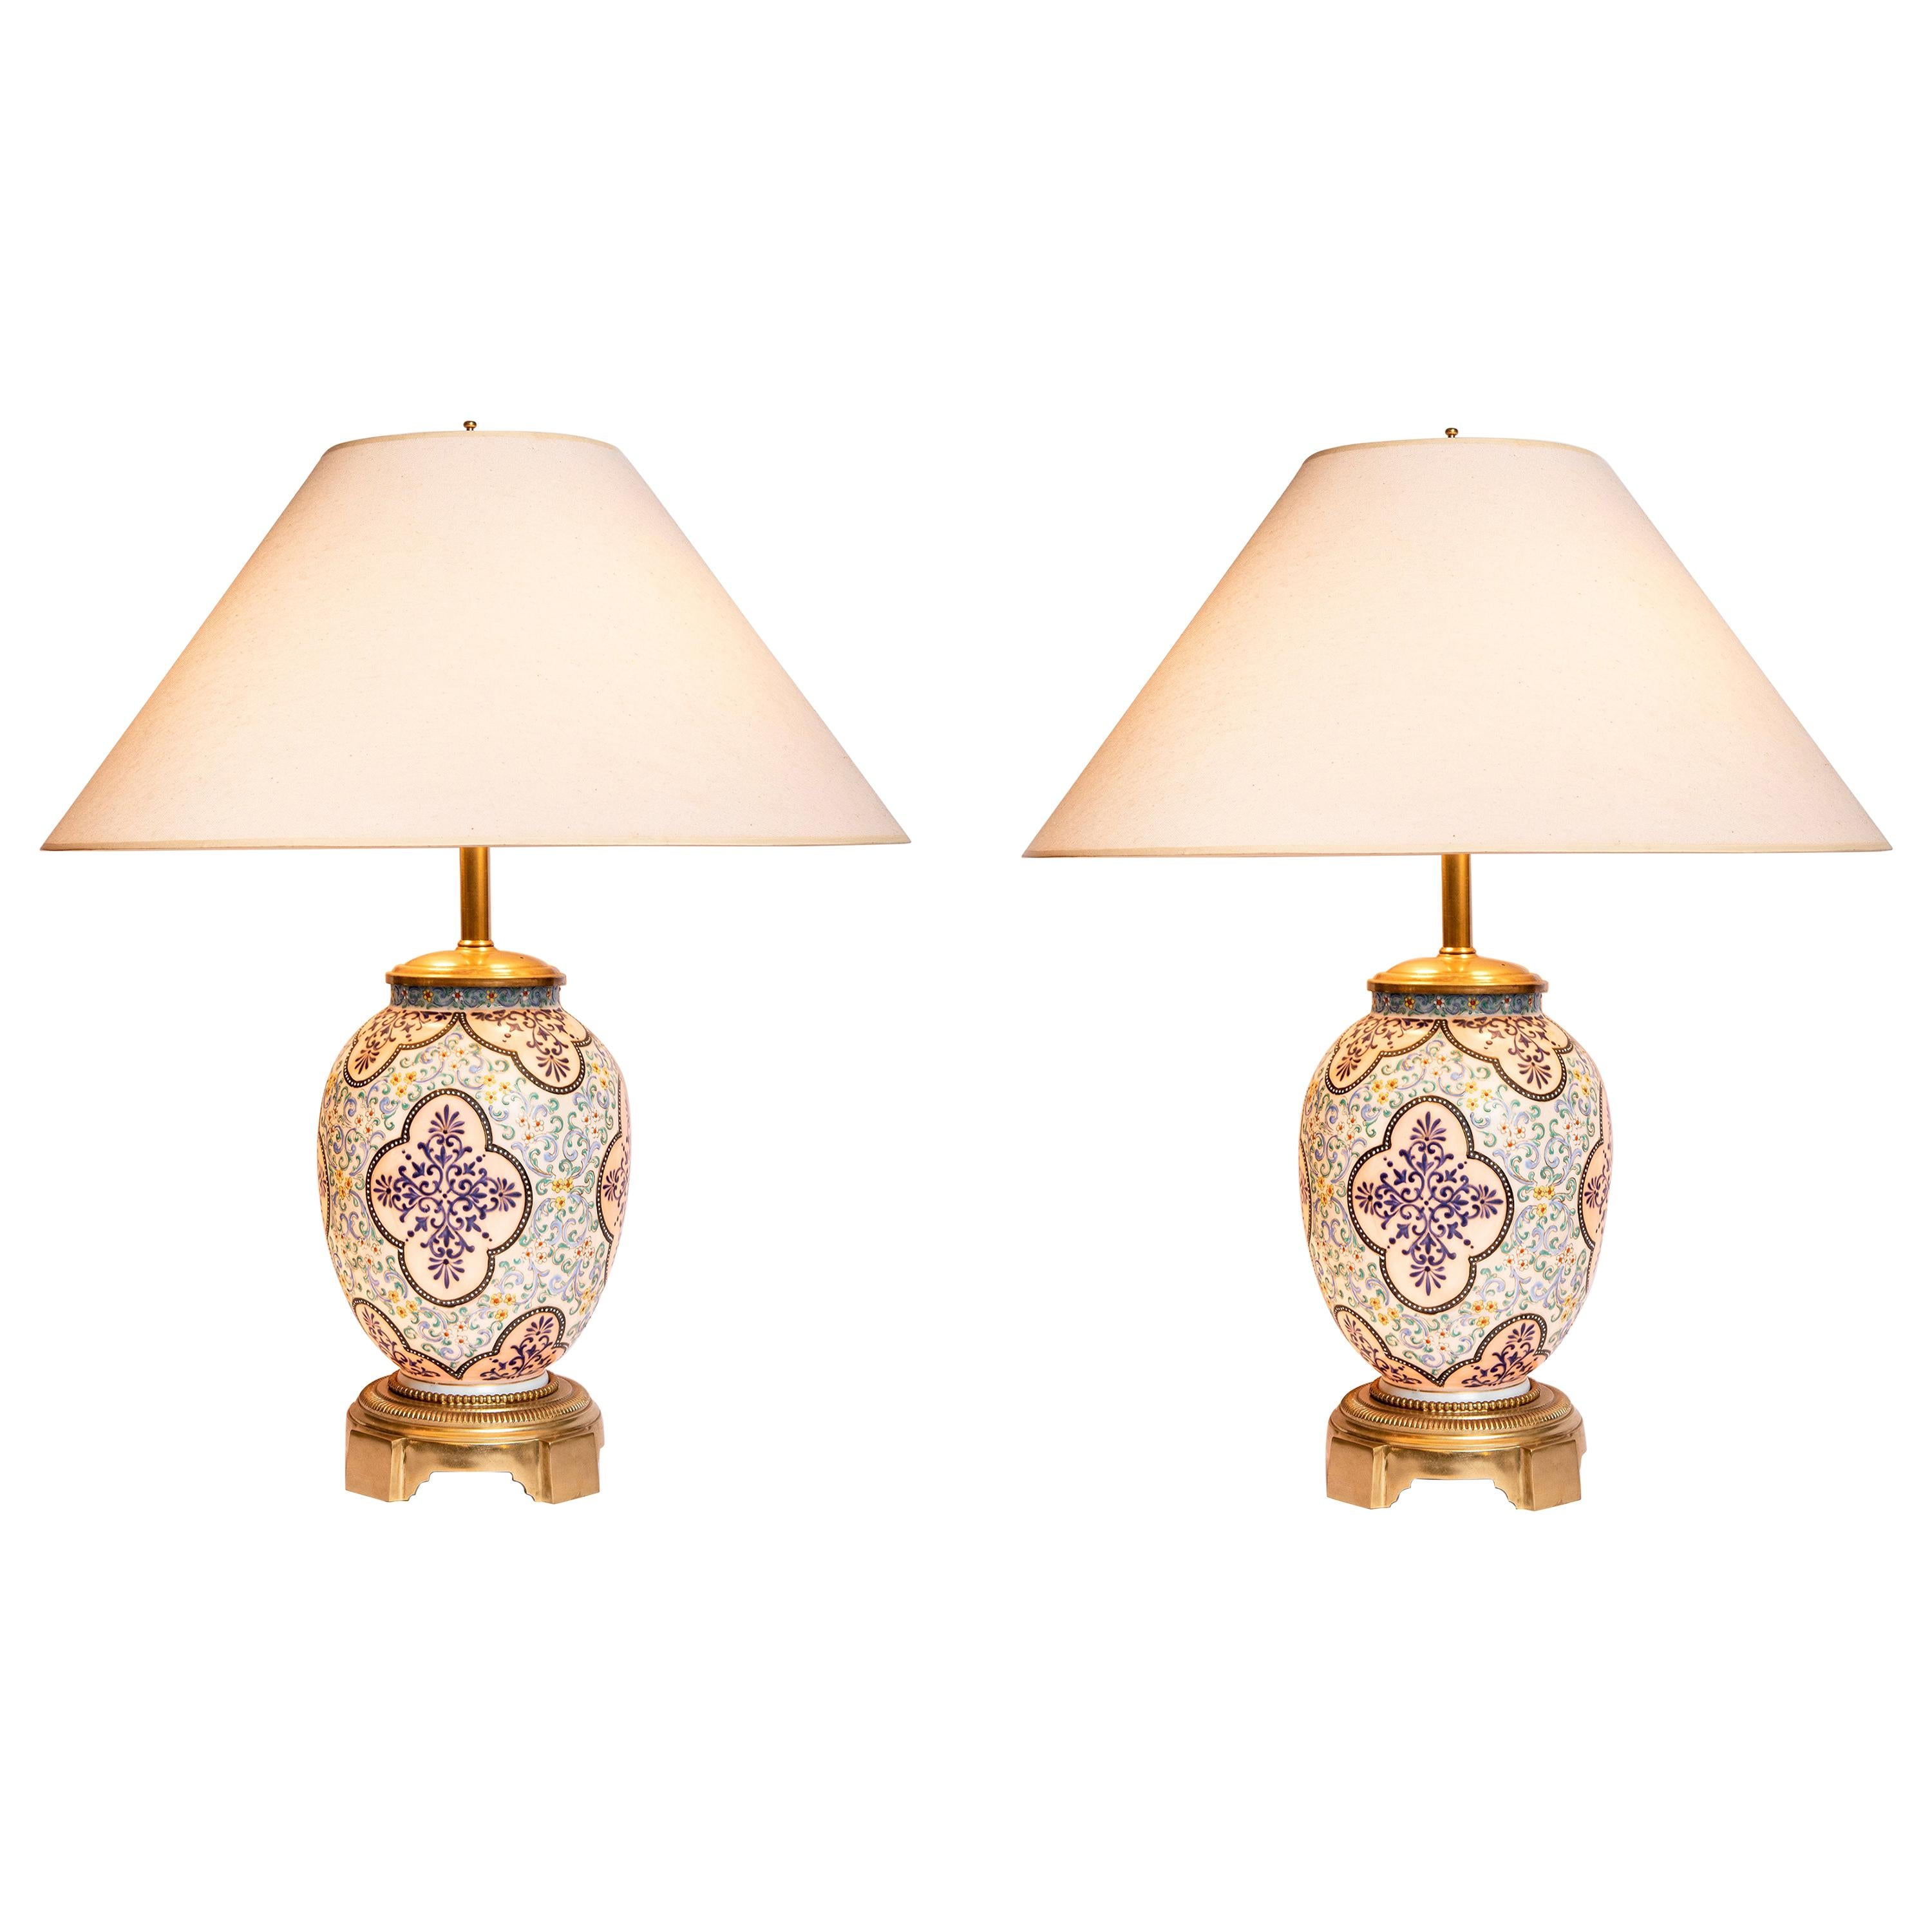 Pair of Painted Opaline and Bronze Table Lamps, Czech, Late 19th Century